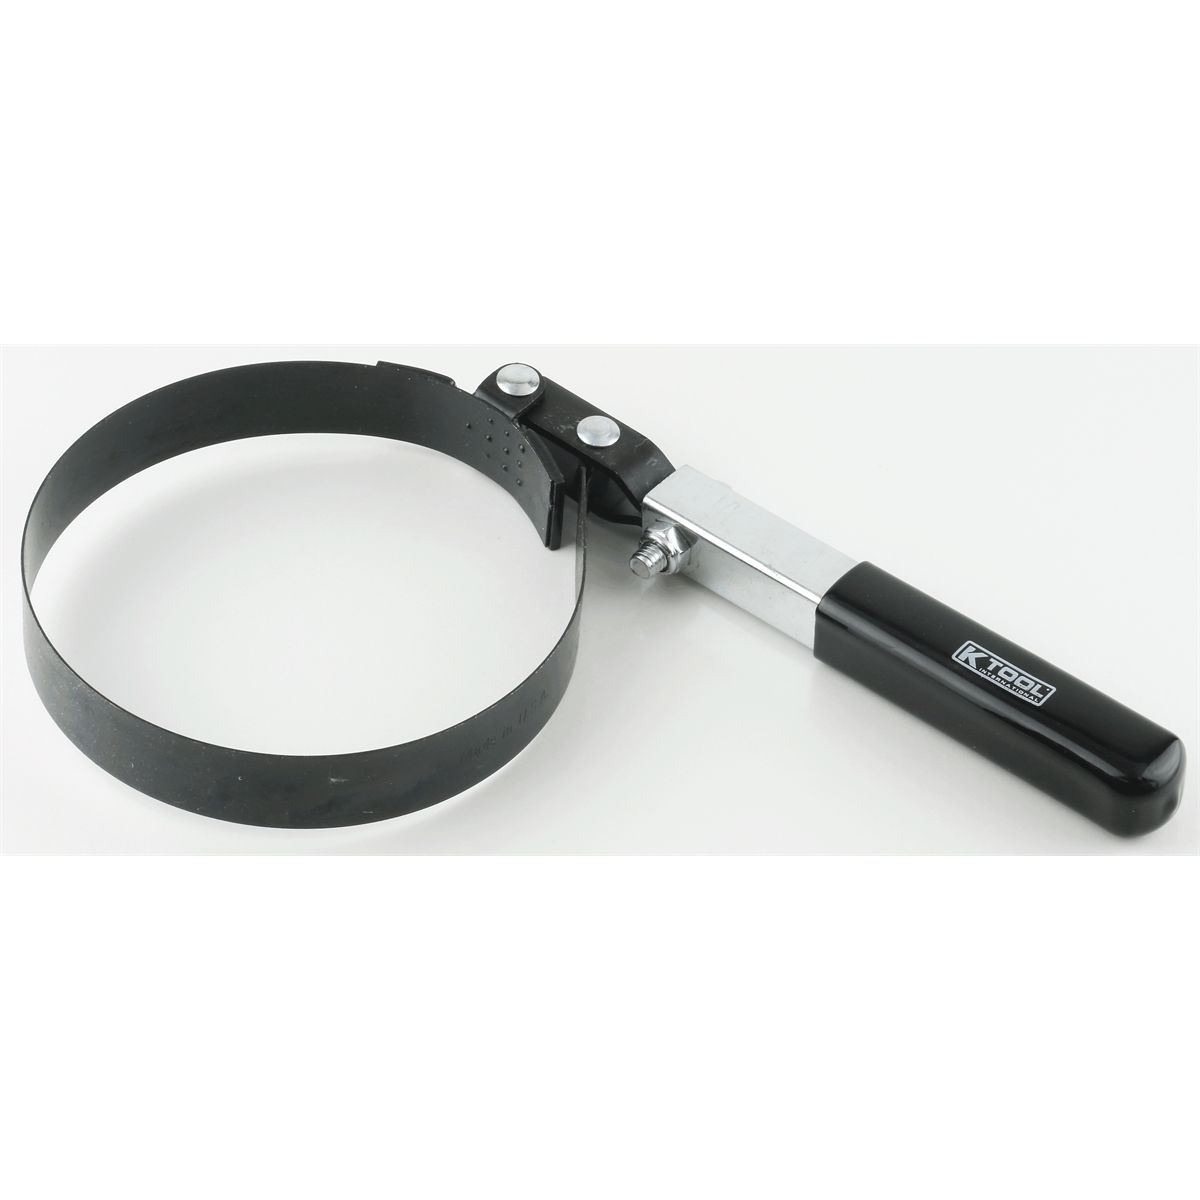 Oil Filter in Diameter Keadic Swivel Handle Oil Filter Wrench Fit 3.24 Inches to 3.74 Inches Standard Band Oil Filter Wrench Perfect for Tight Spaces Use 82.5-95 mm 